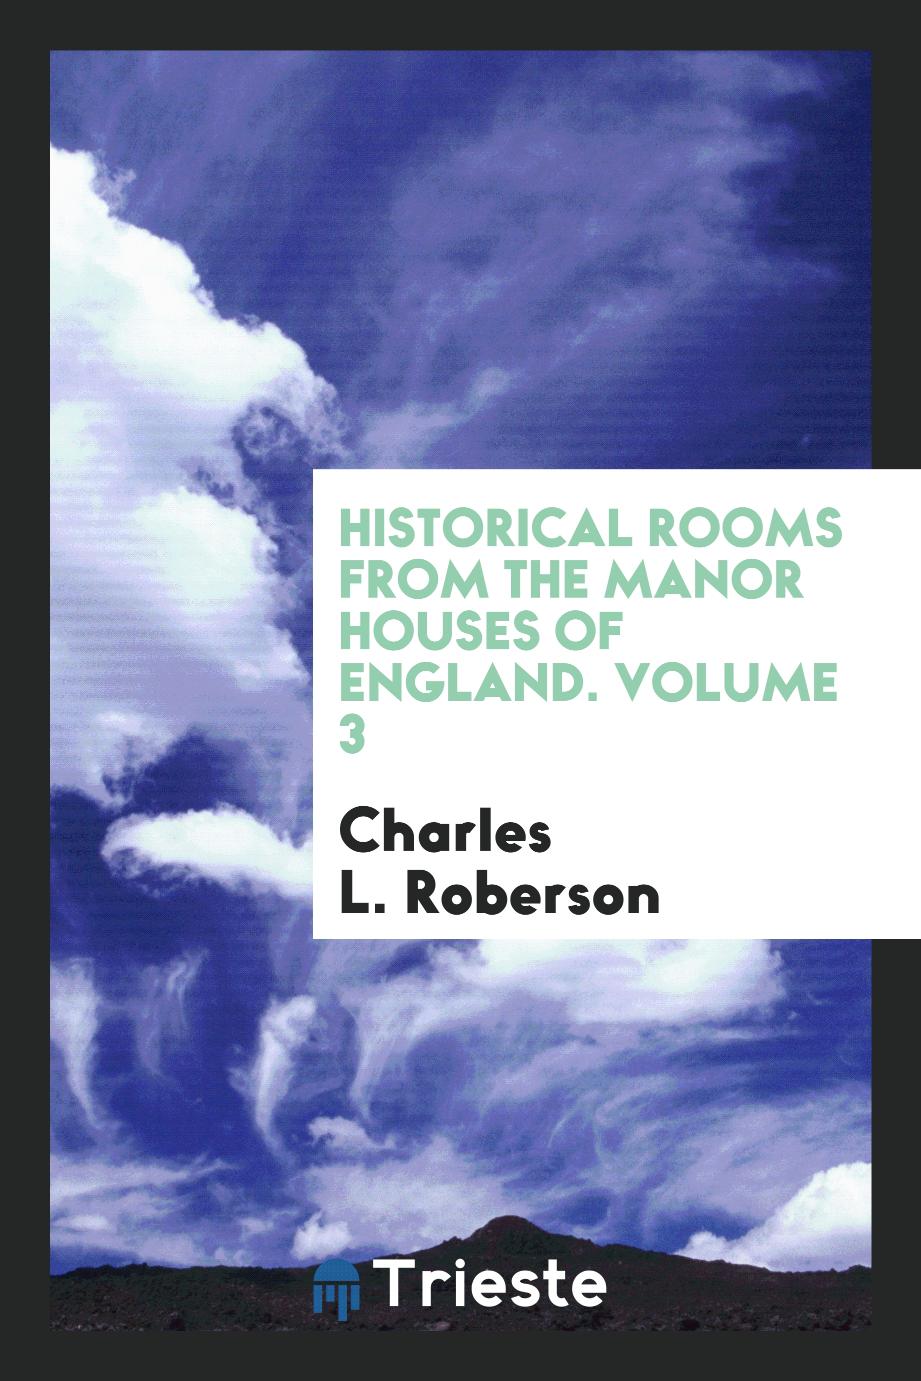 Historical rooms from the manor houses of England. Volume 3